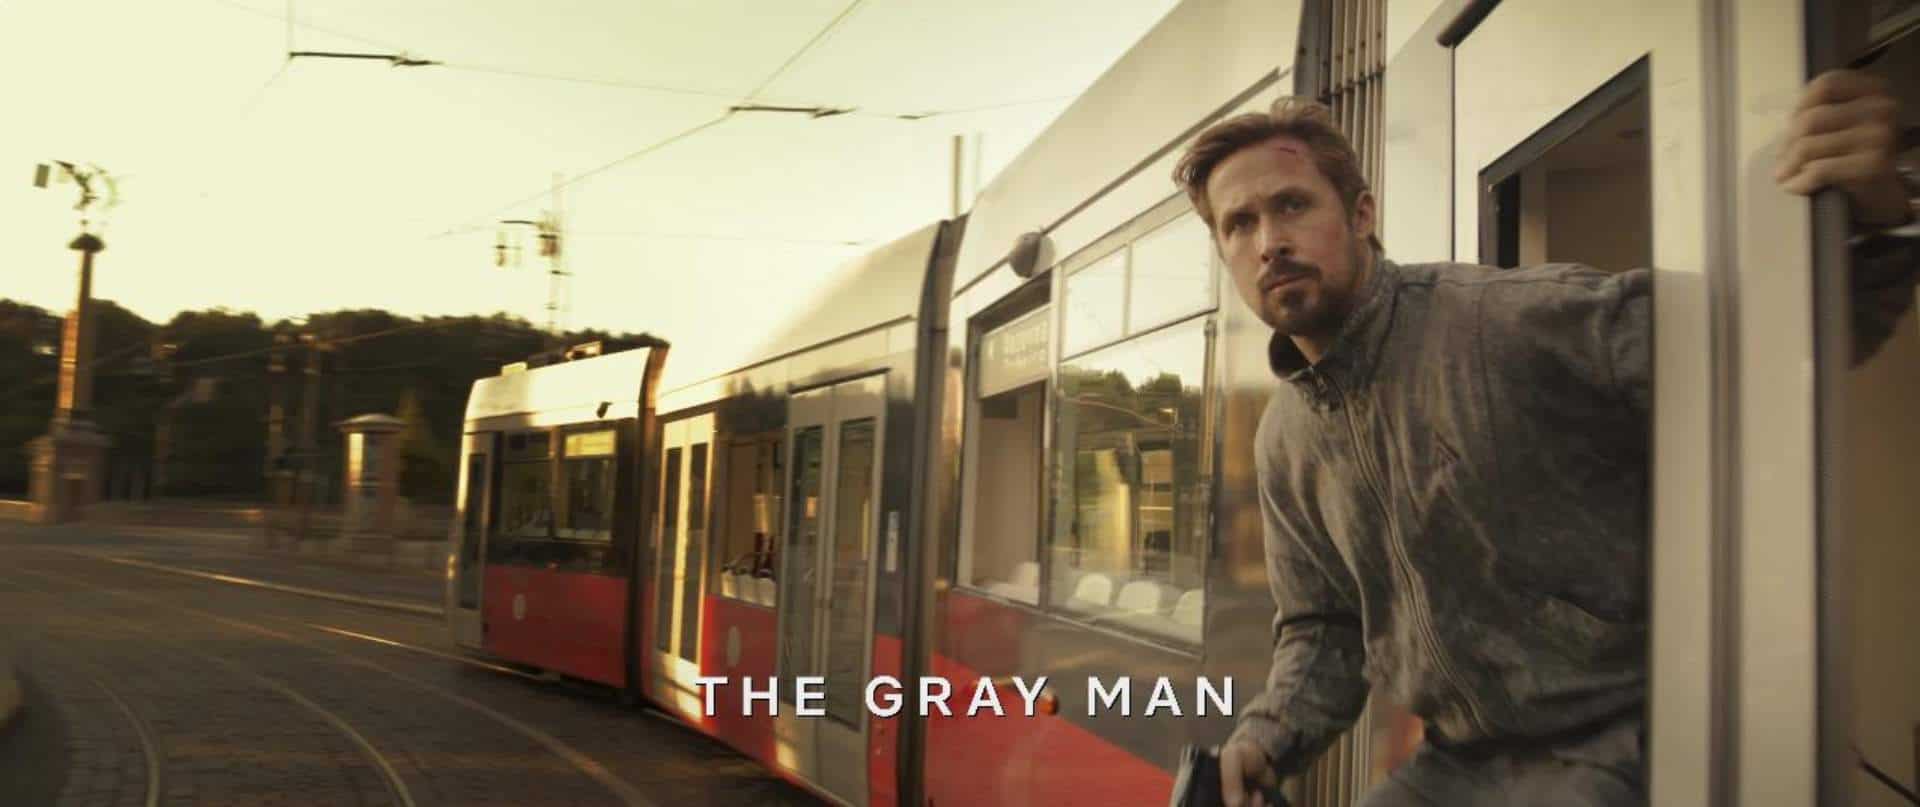 “The Gray Man”_ Russo Brothers’ Crime Novel Adaptation is the Most Expensive Netflix Movie Ever